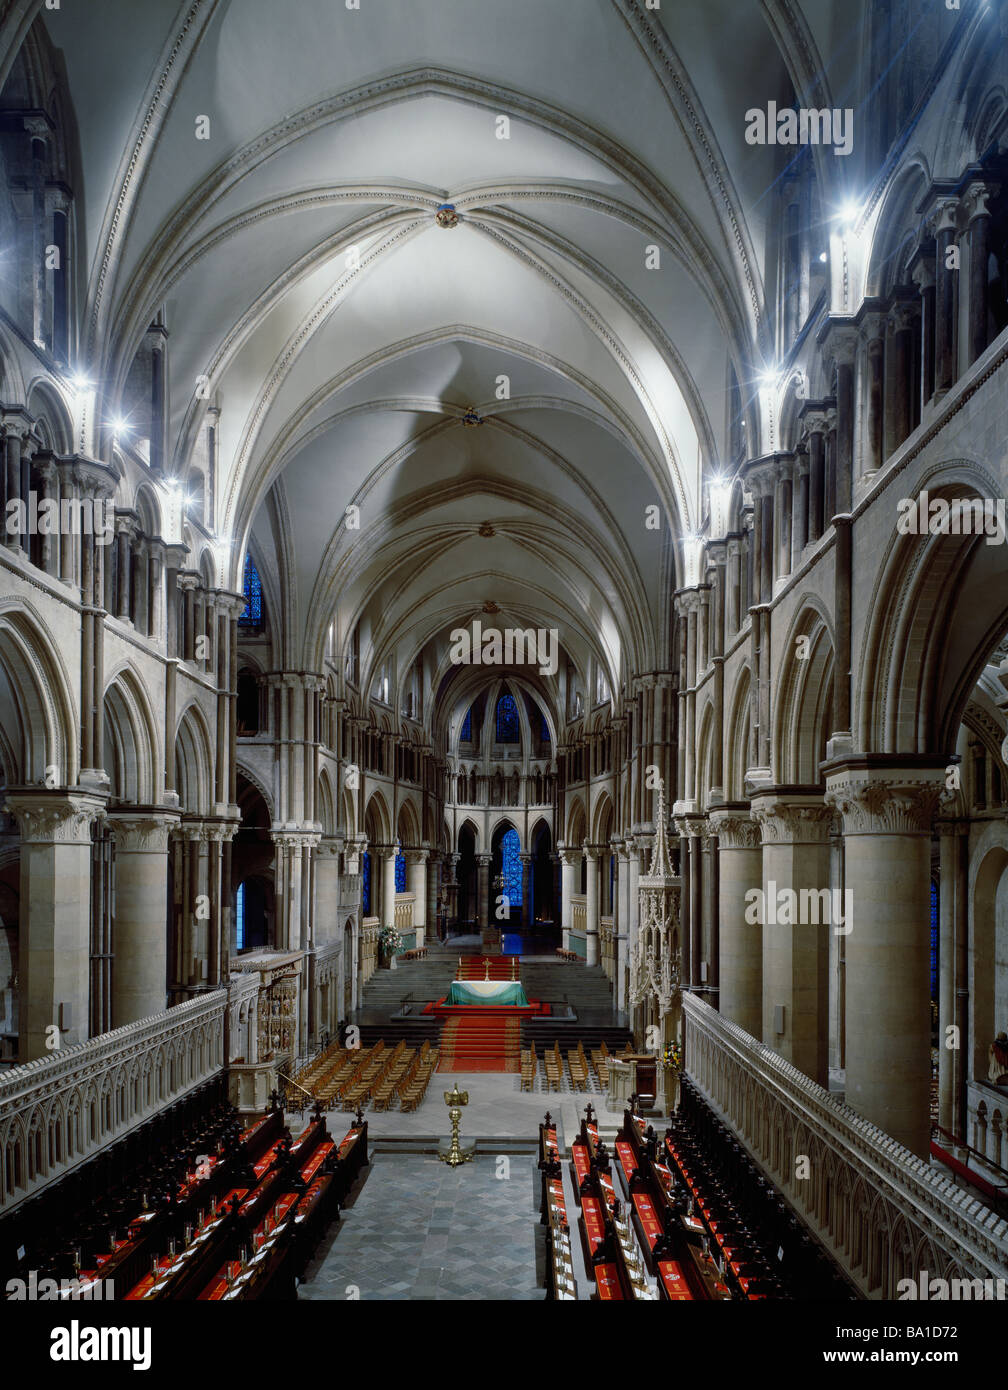 Canterbury Cathedral Choir interior Banque D'Images